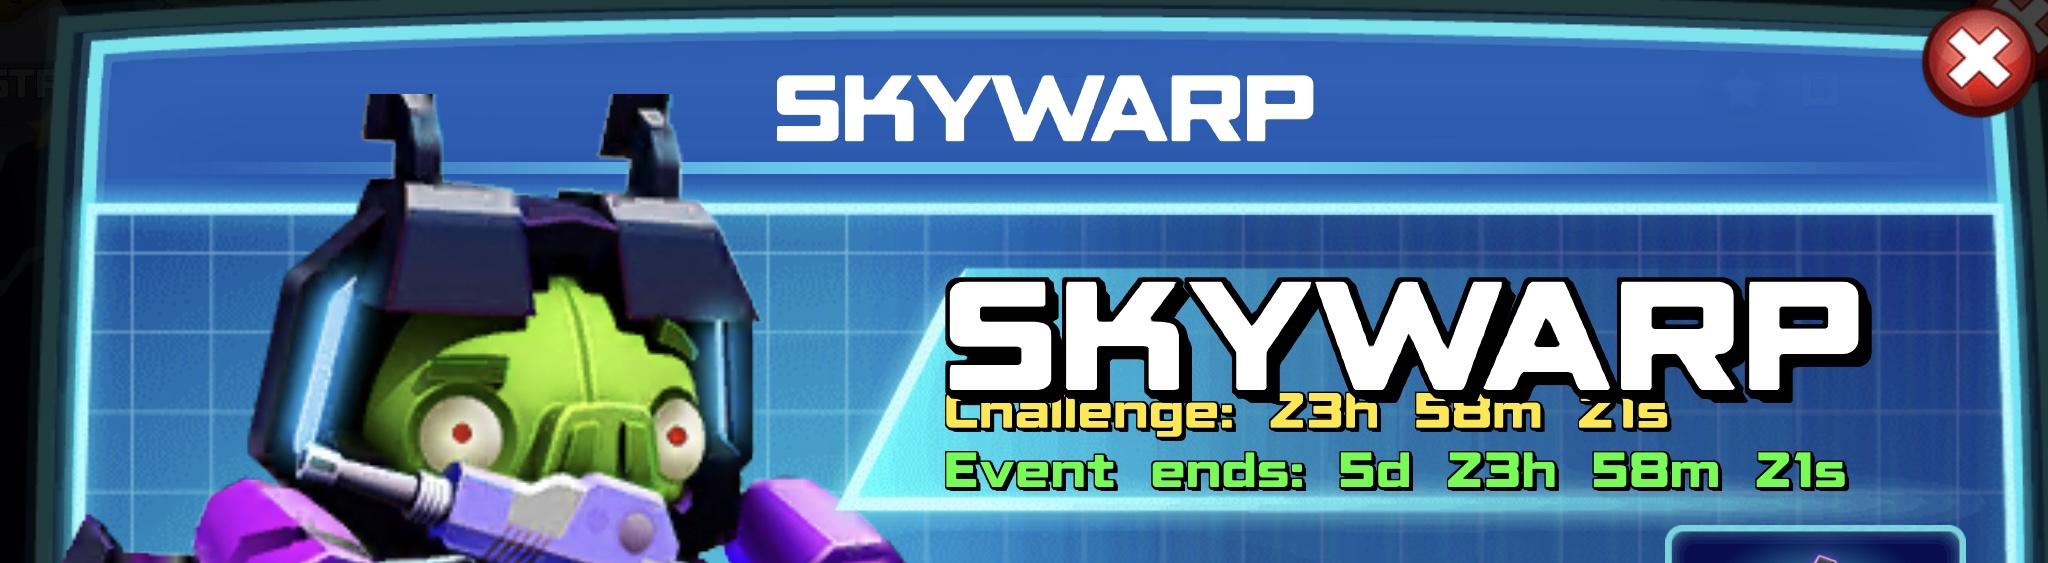 The event banner for Skywarp